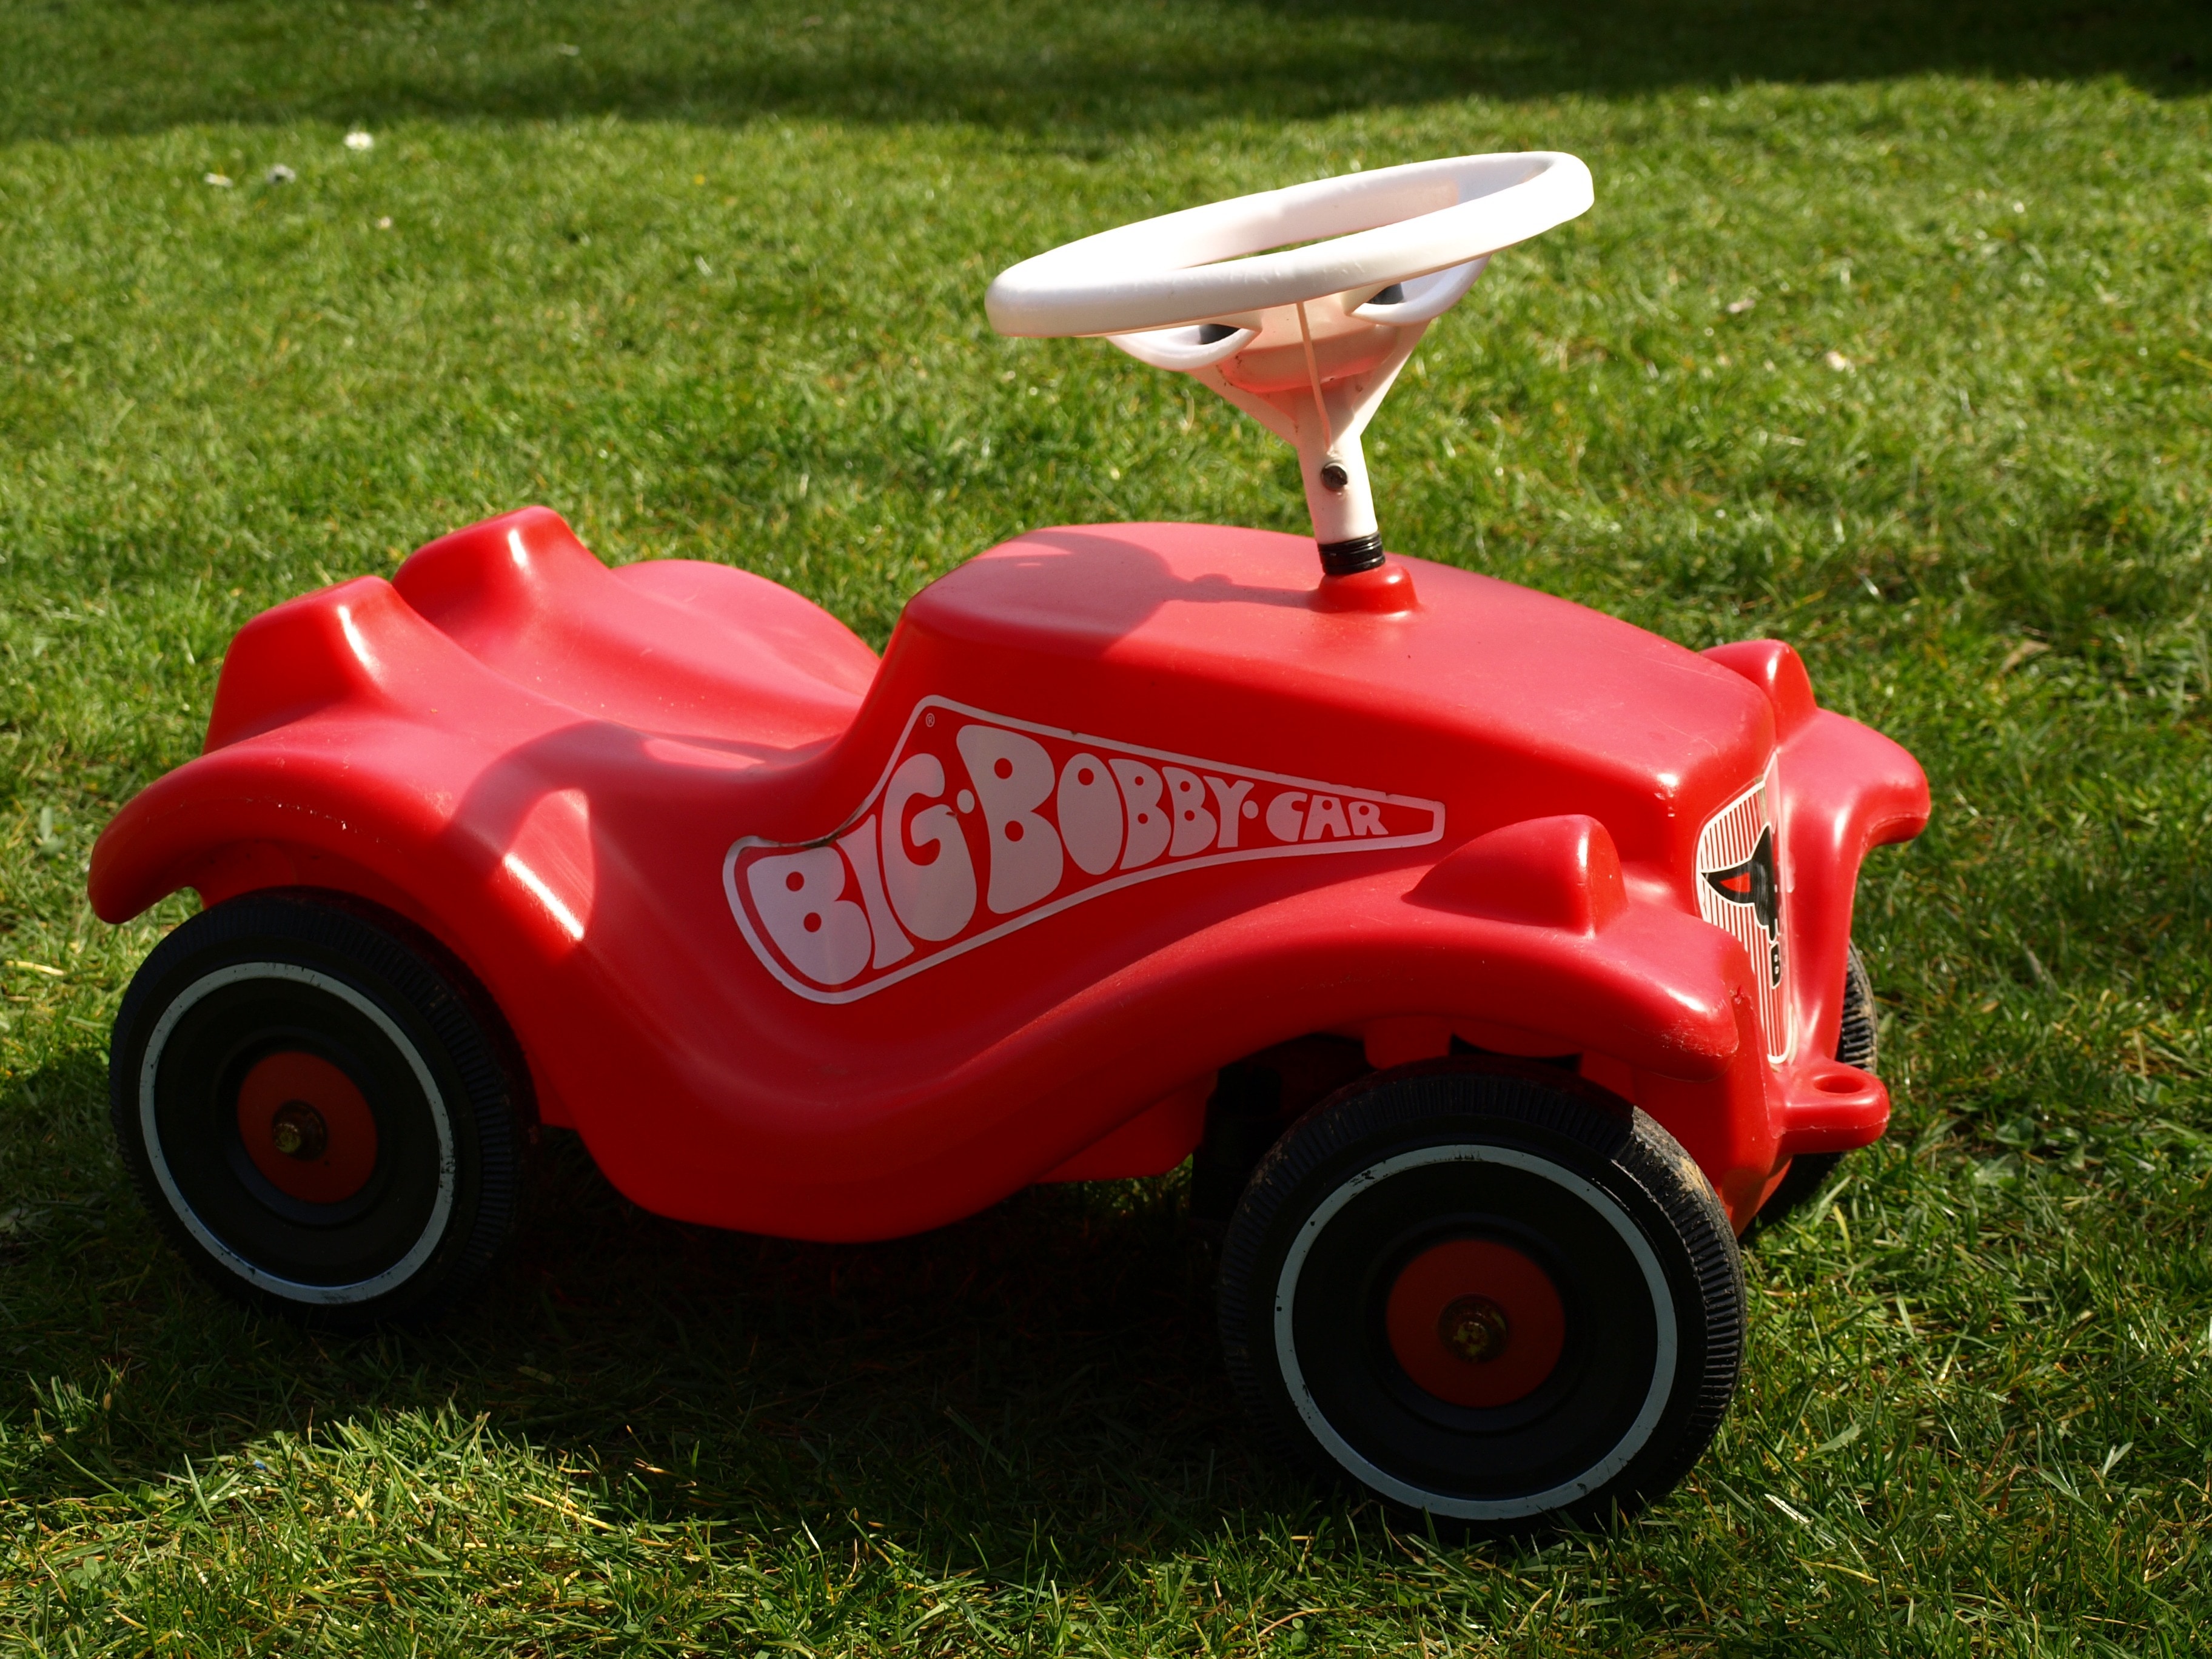 red and white Big bobby Ghh ride on toy